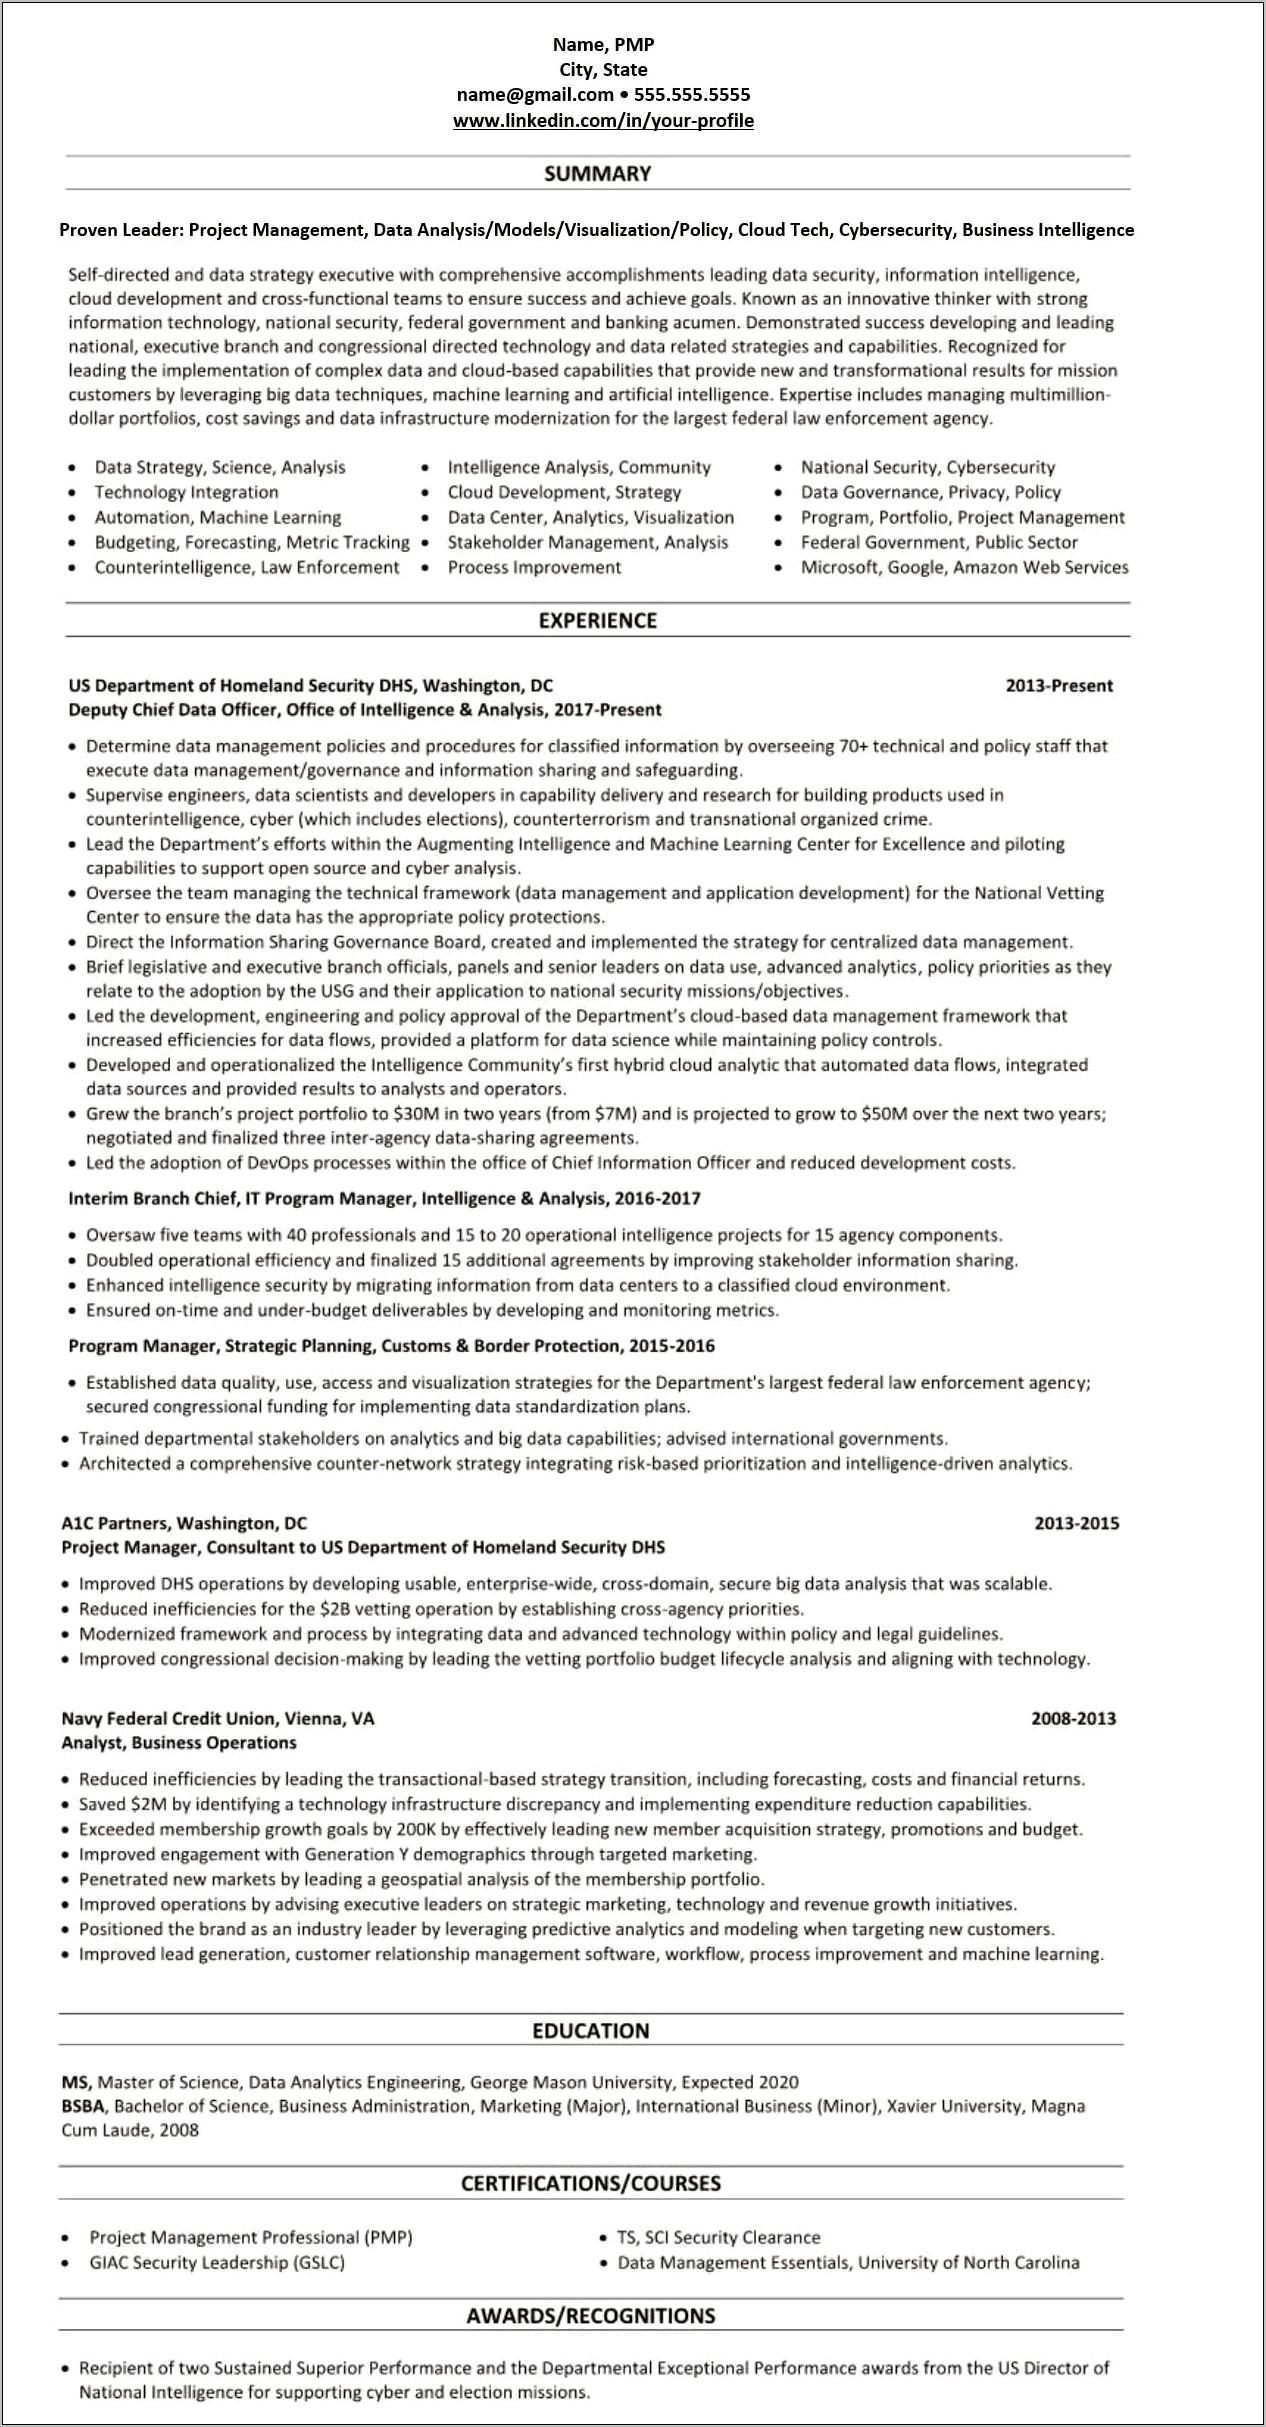 Resume Objective For Aspiring Project Manager